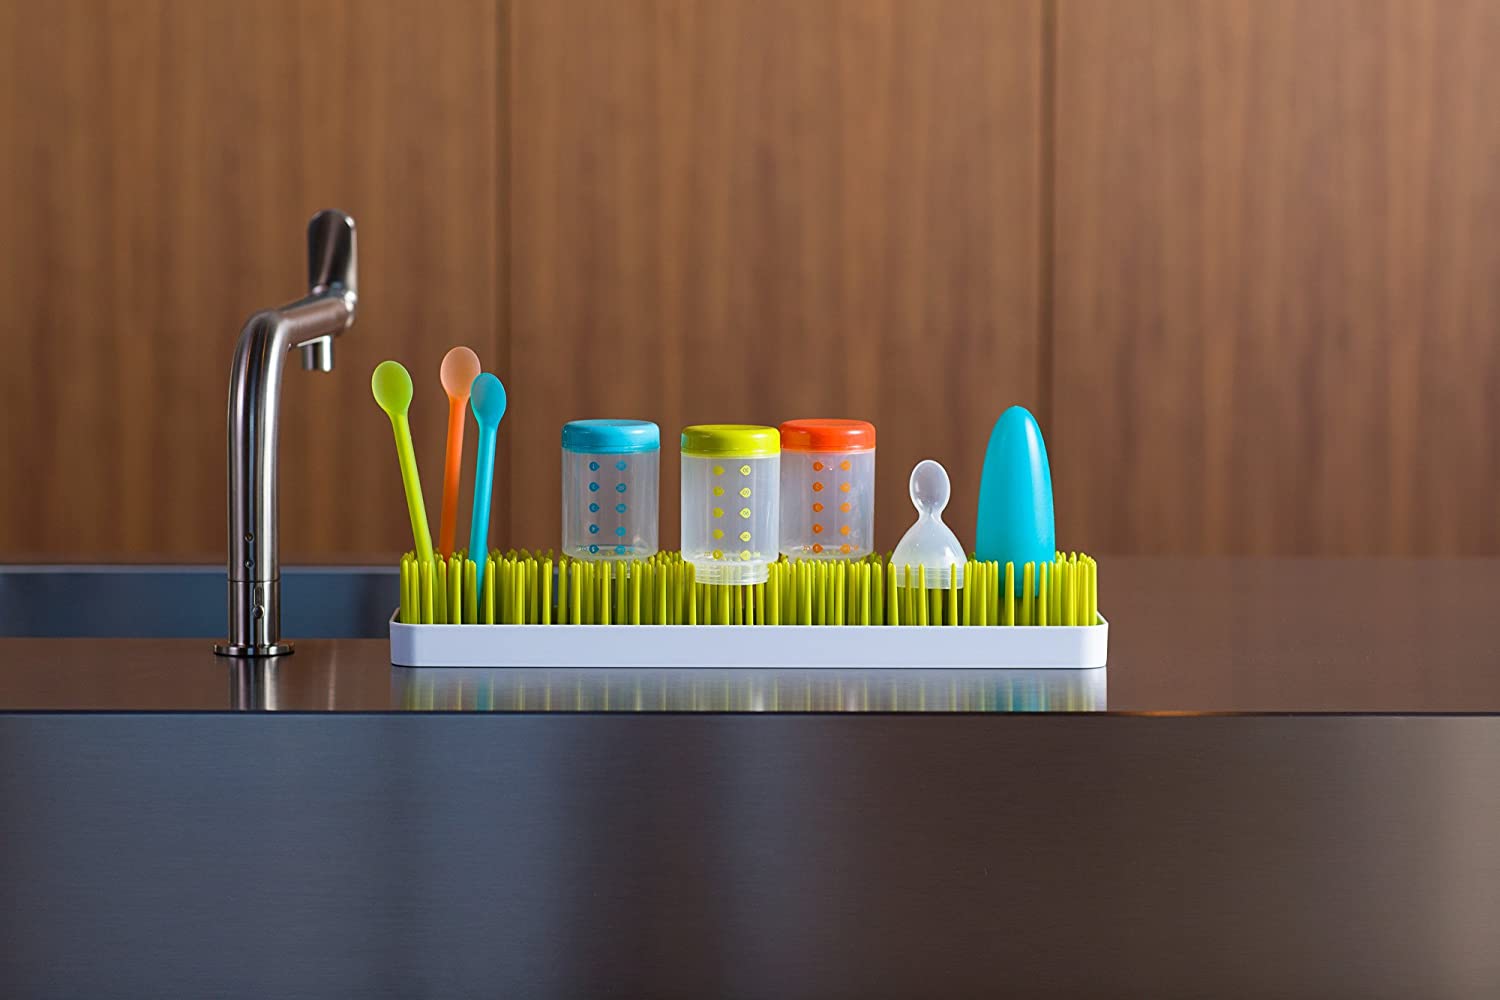 Boon - Green Patch Countertop Drying Rack